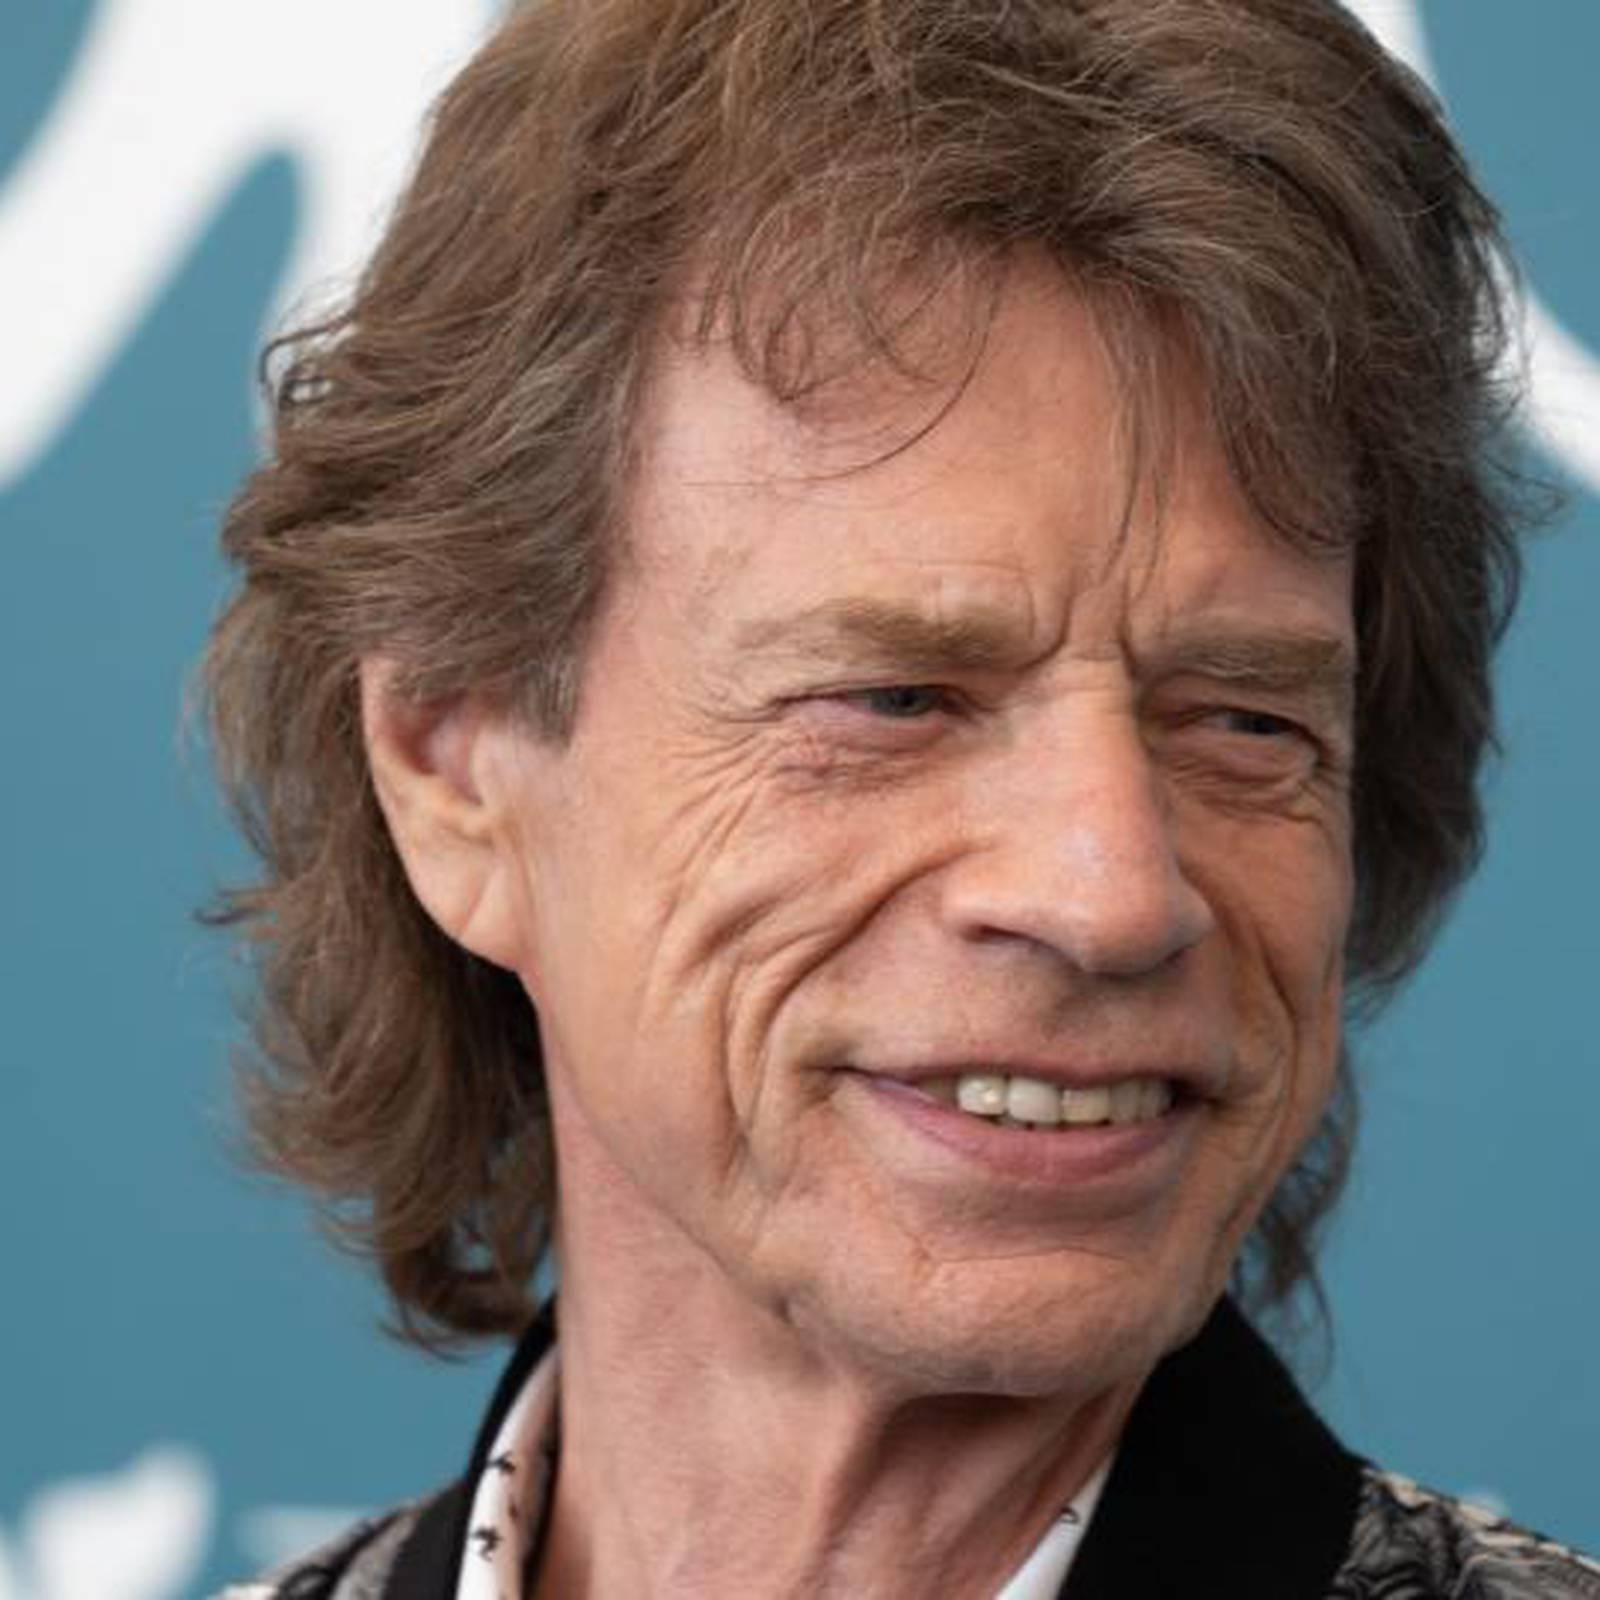 Jagger: was doing\' didn\'t so was – Mick ago what I \'It can\'t Times I I long remember. know The Irish